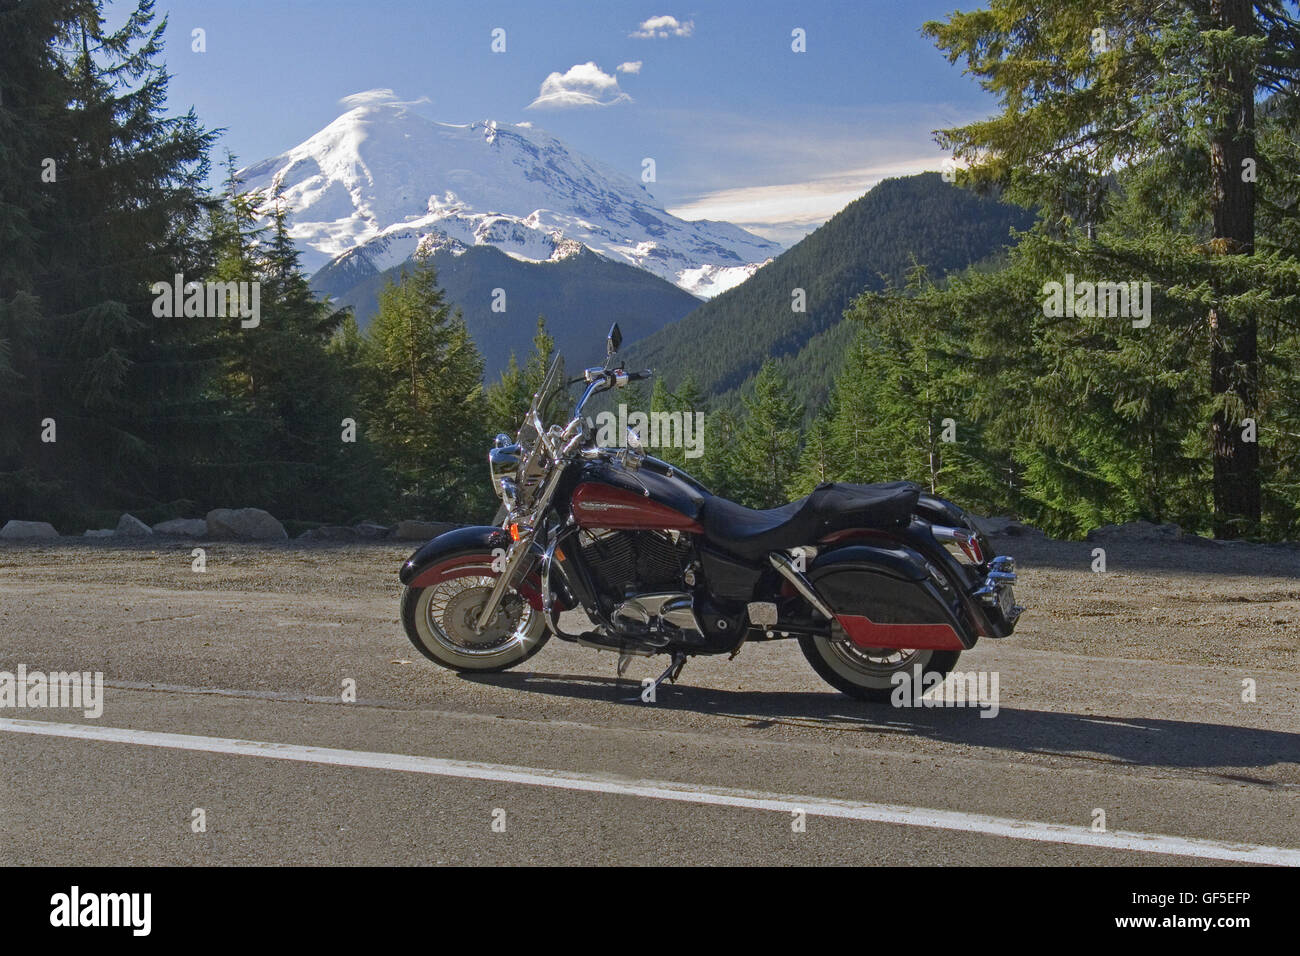 A motorcycle is parked at a roadside pullout on Scenic 410, going through Mount Rainer National Park in Washington State, USA. Stock Photo